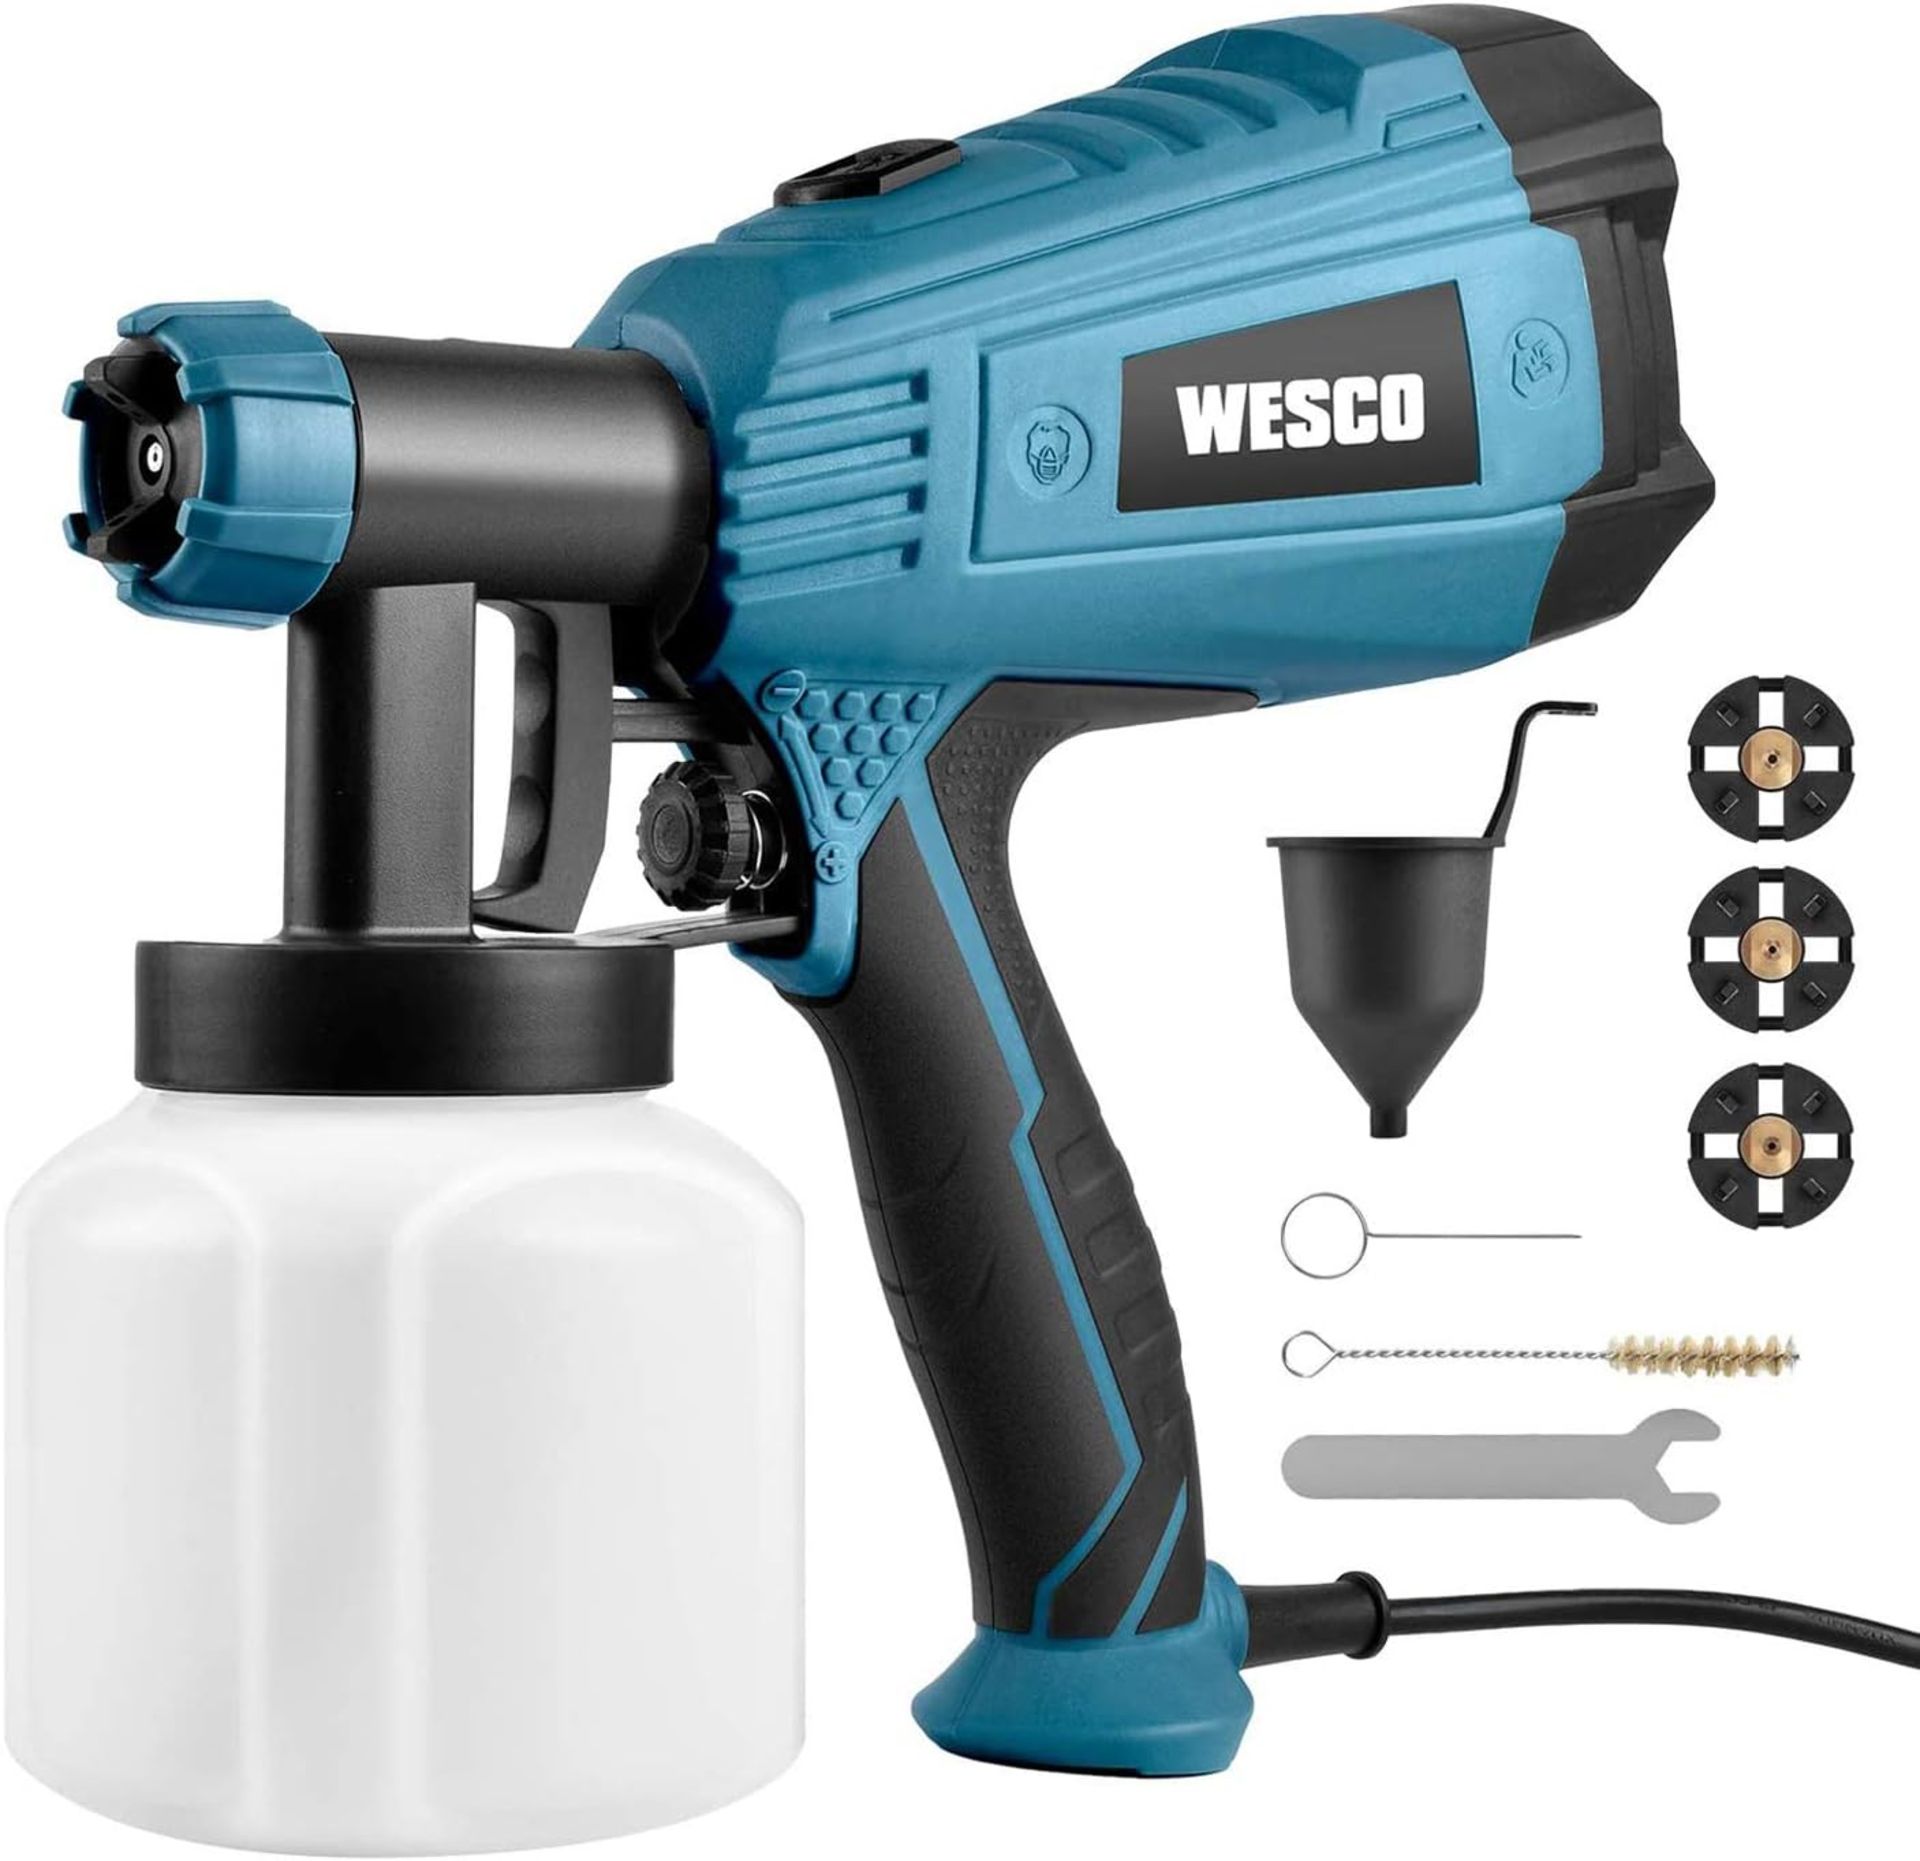 Paint Sprayer, WESCO 500W Electric Paint Spray Gun With 3 Nozzles(1.5/1.8/2.0mm), 800ml/min Max A...